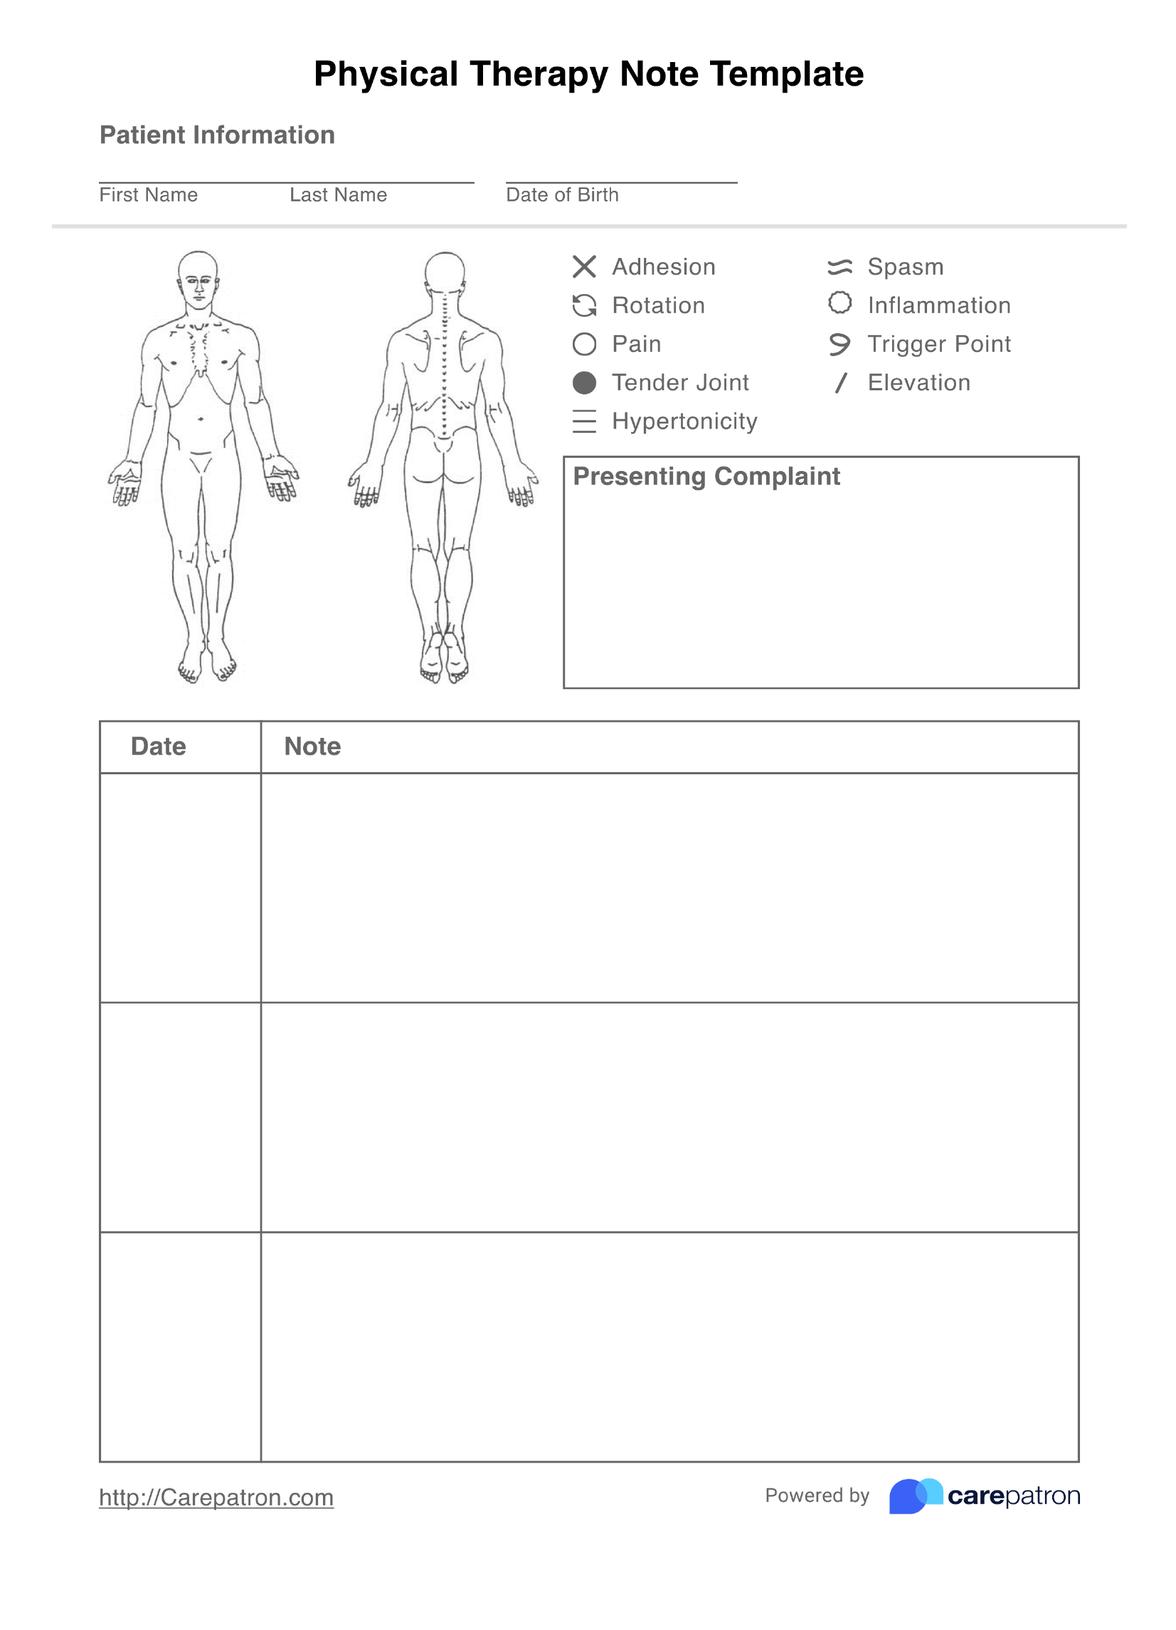 Physical Therapy Note Template PDF Example